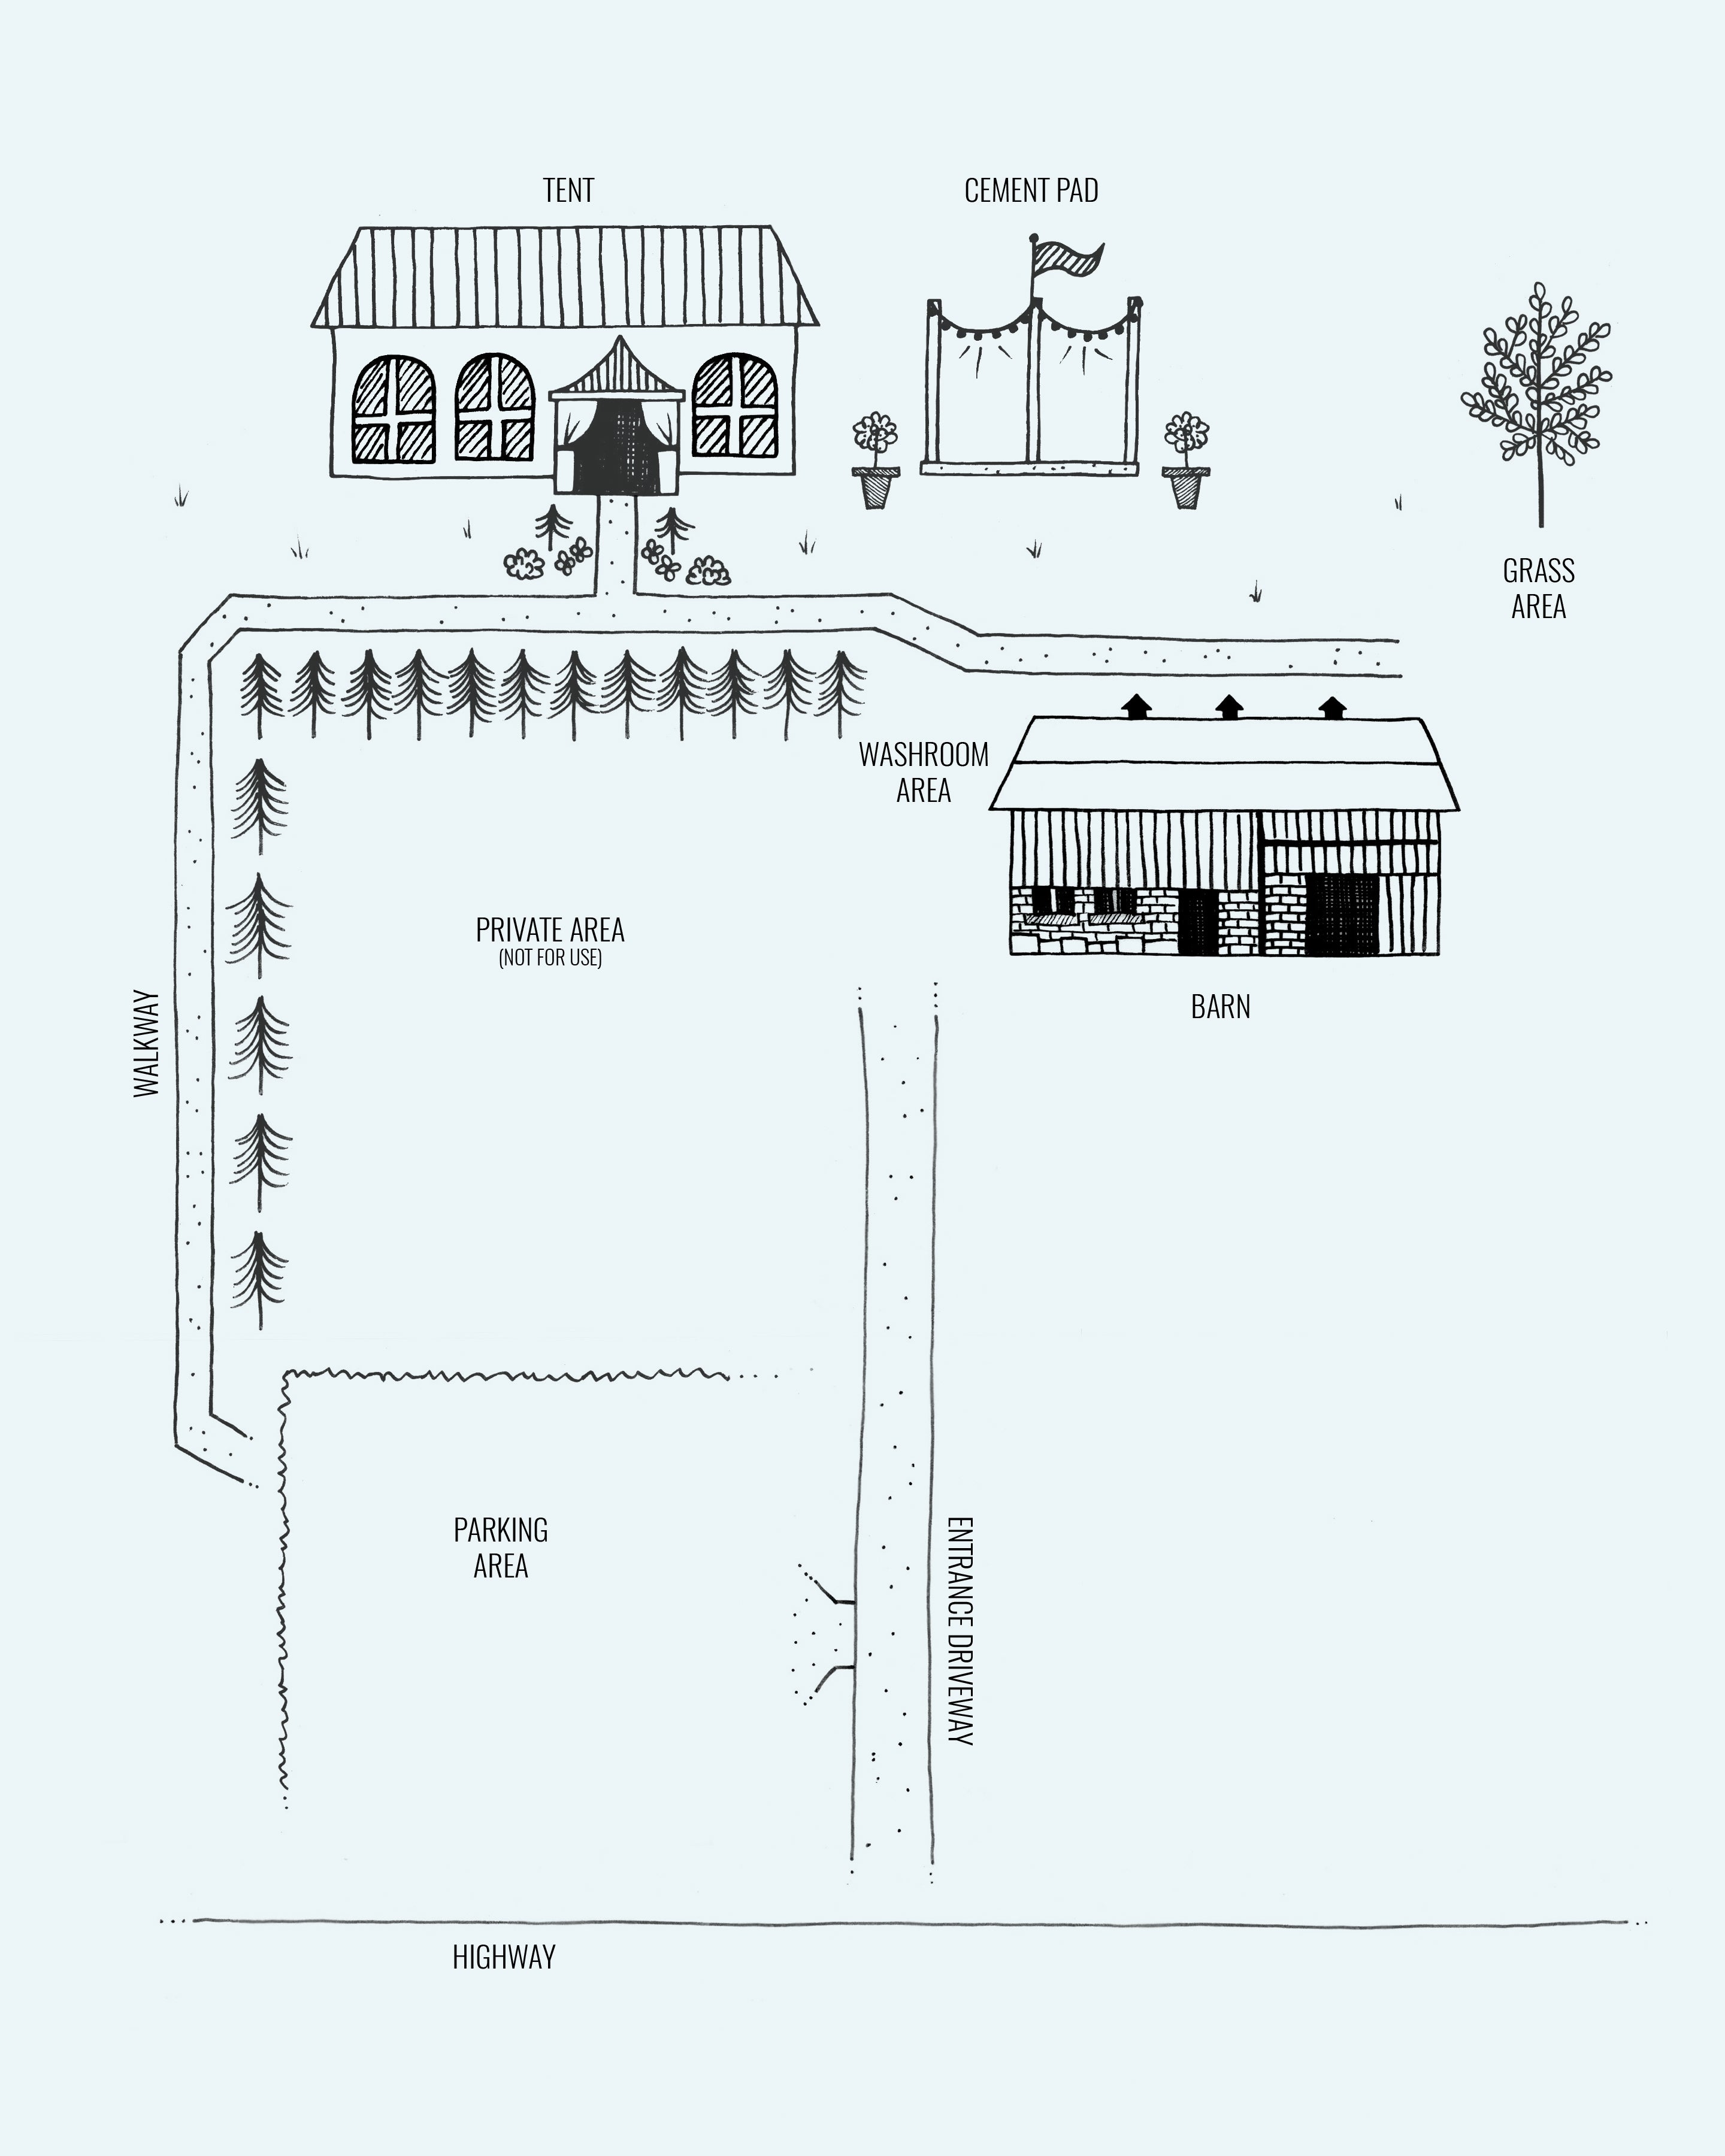 Map of White Spruce Acres showing parking area, barn, tent and cement pad.